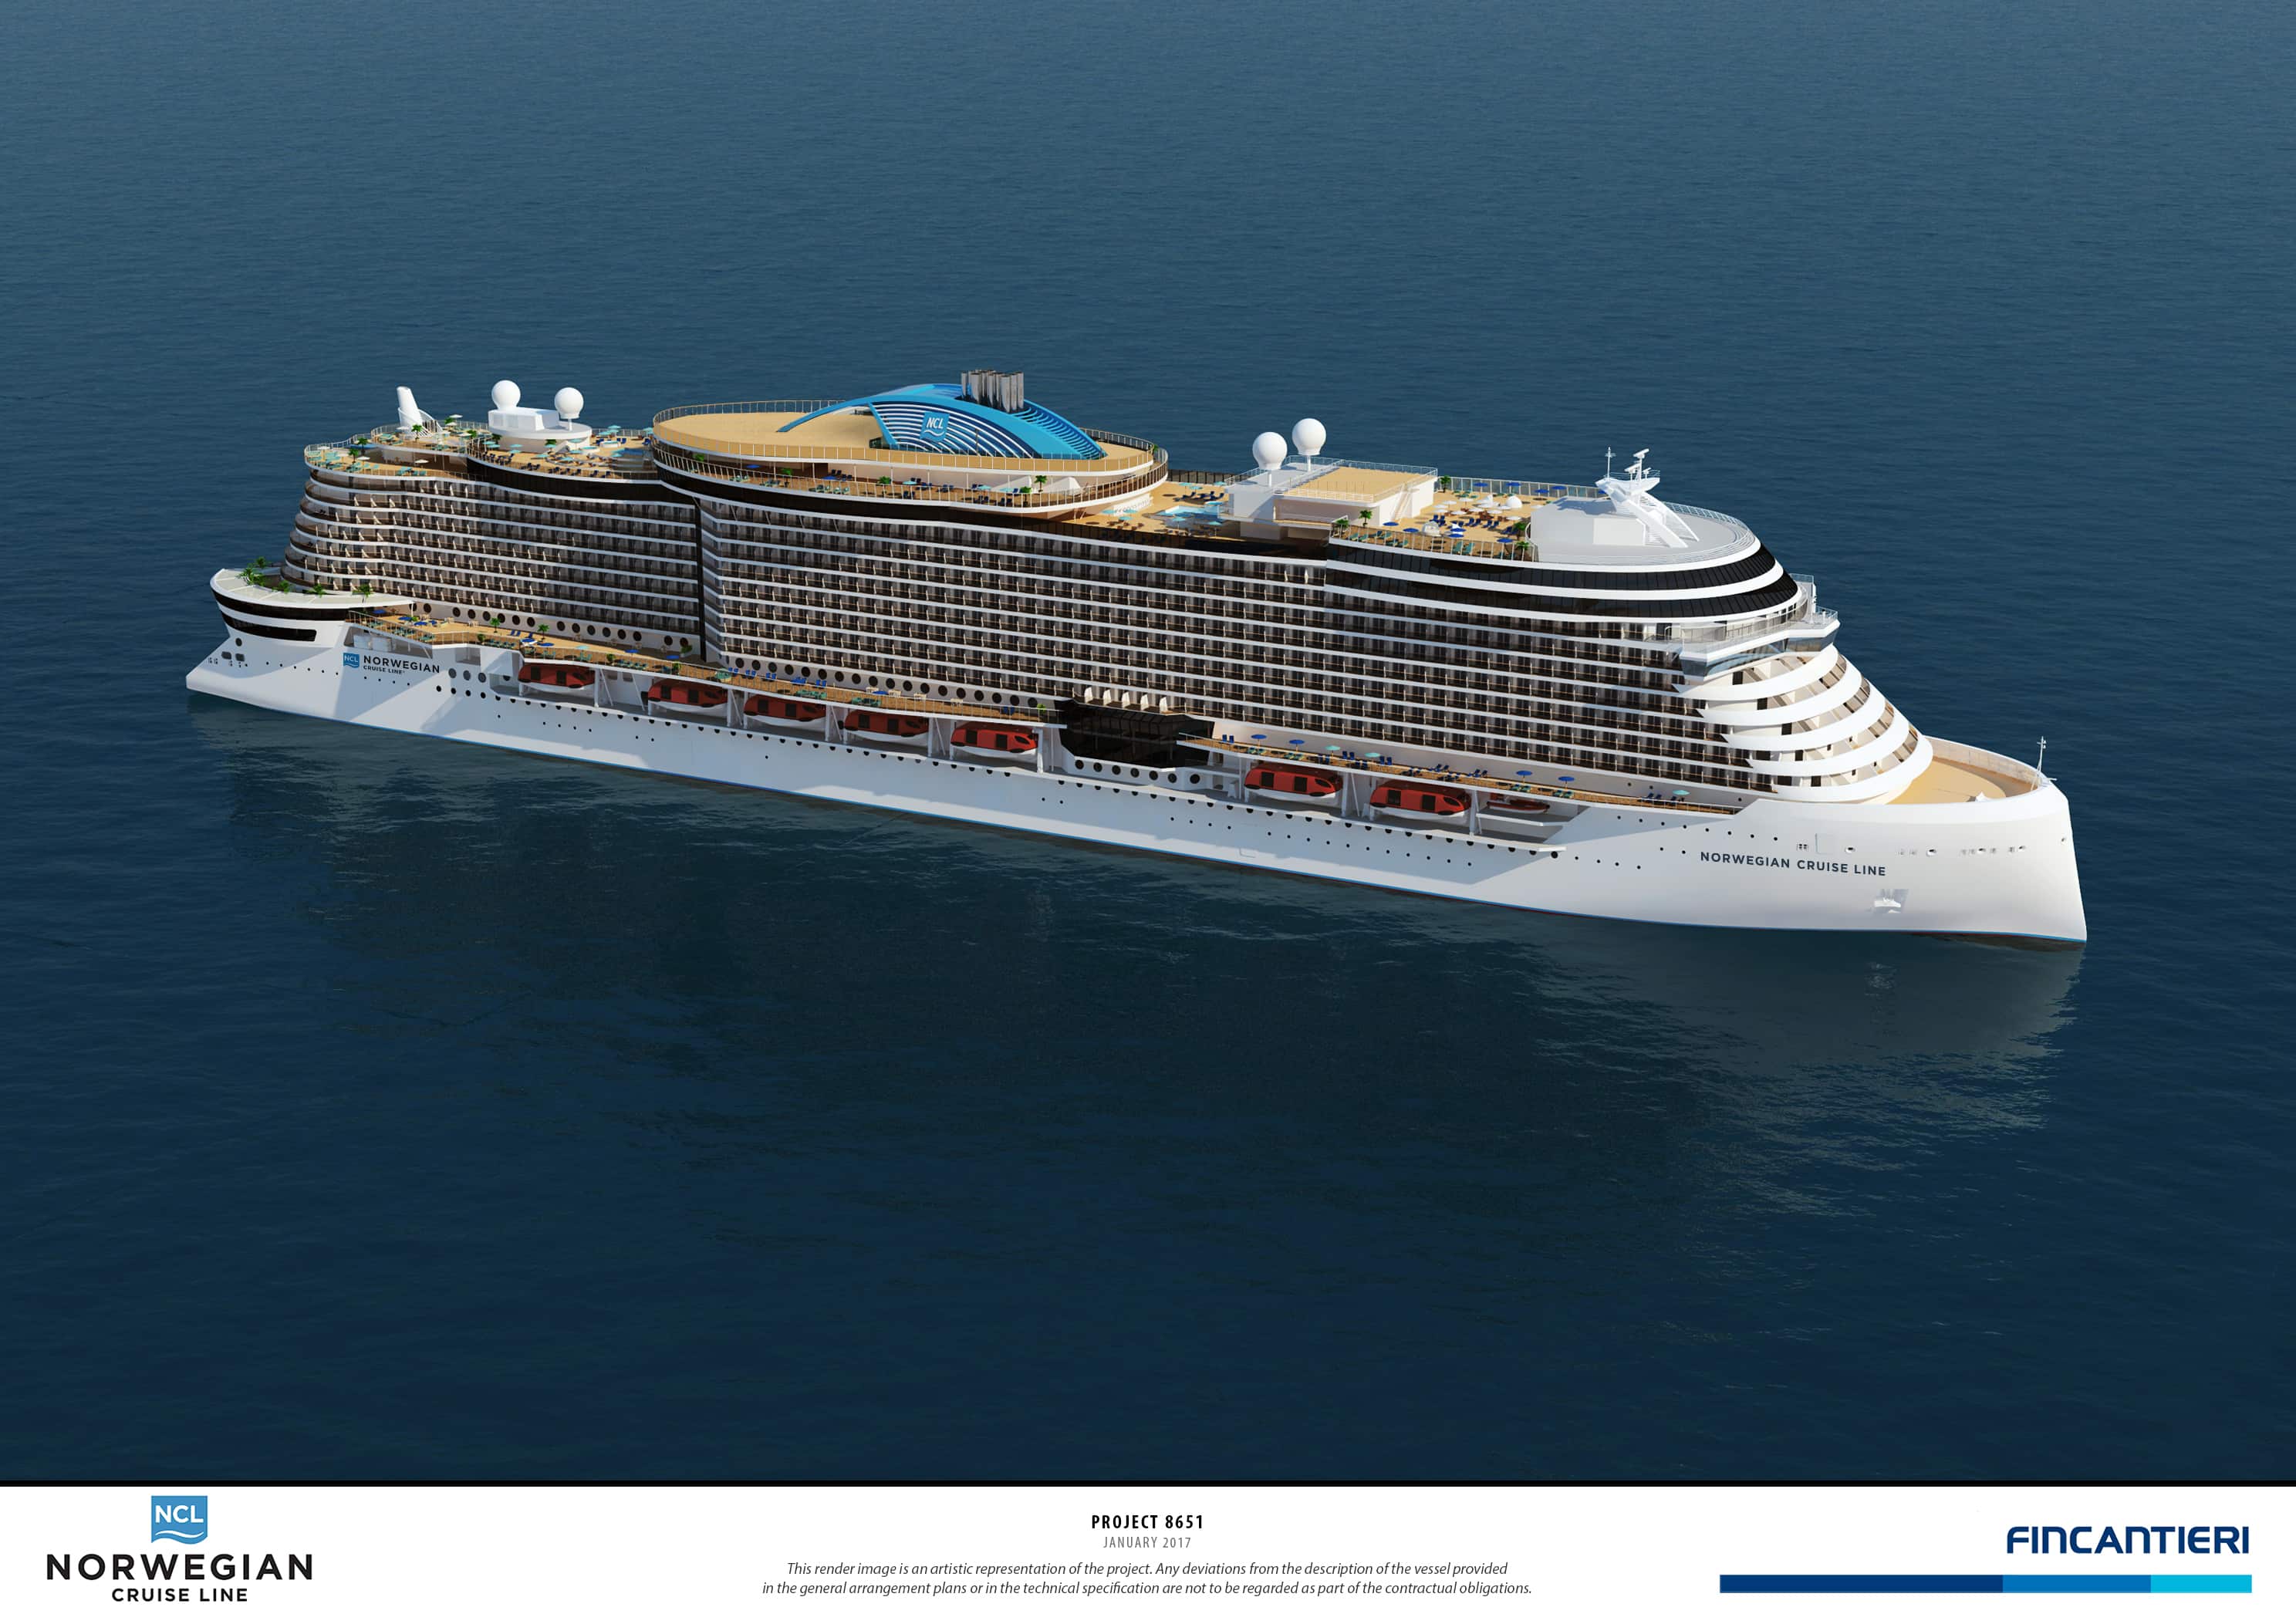 This New Class Of Ships Will Continue Norwegian Cruise Line Brand S Legacy Introducing Meaningful Innovation To The Industry Said Frank Del Rio